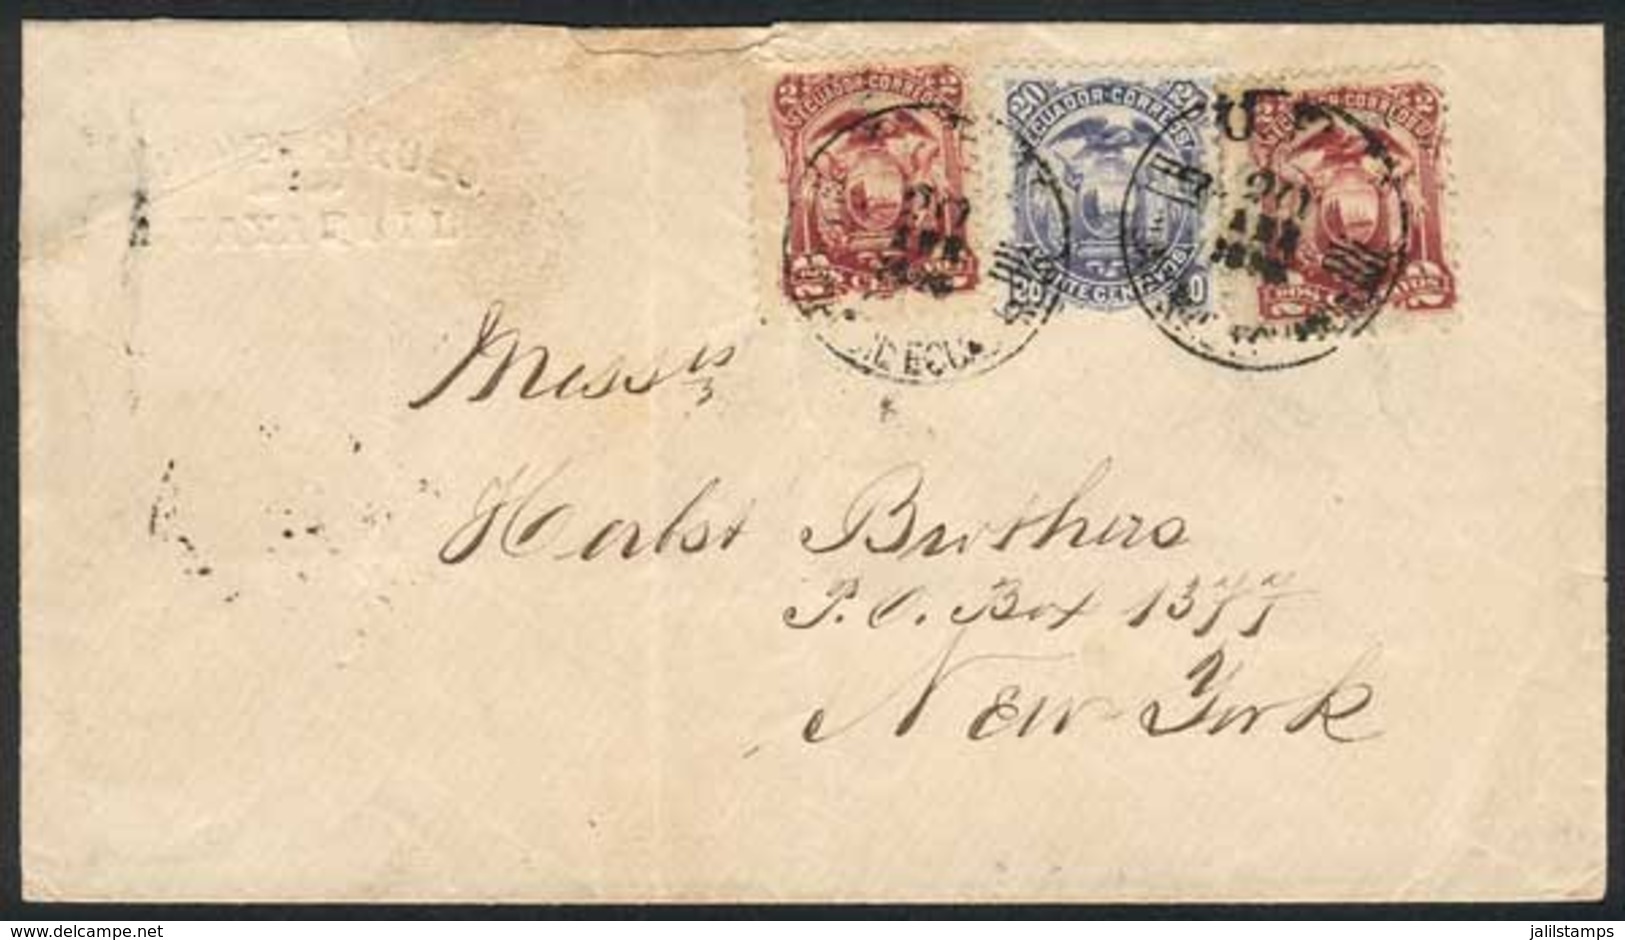 676 ECUADOR: Cover Franked With 20c. (Sc.16) + 2c. X2 (Sc.13),sent From Guayaquil To New - Equateur